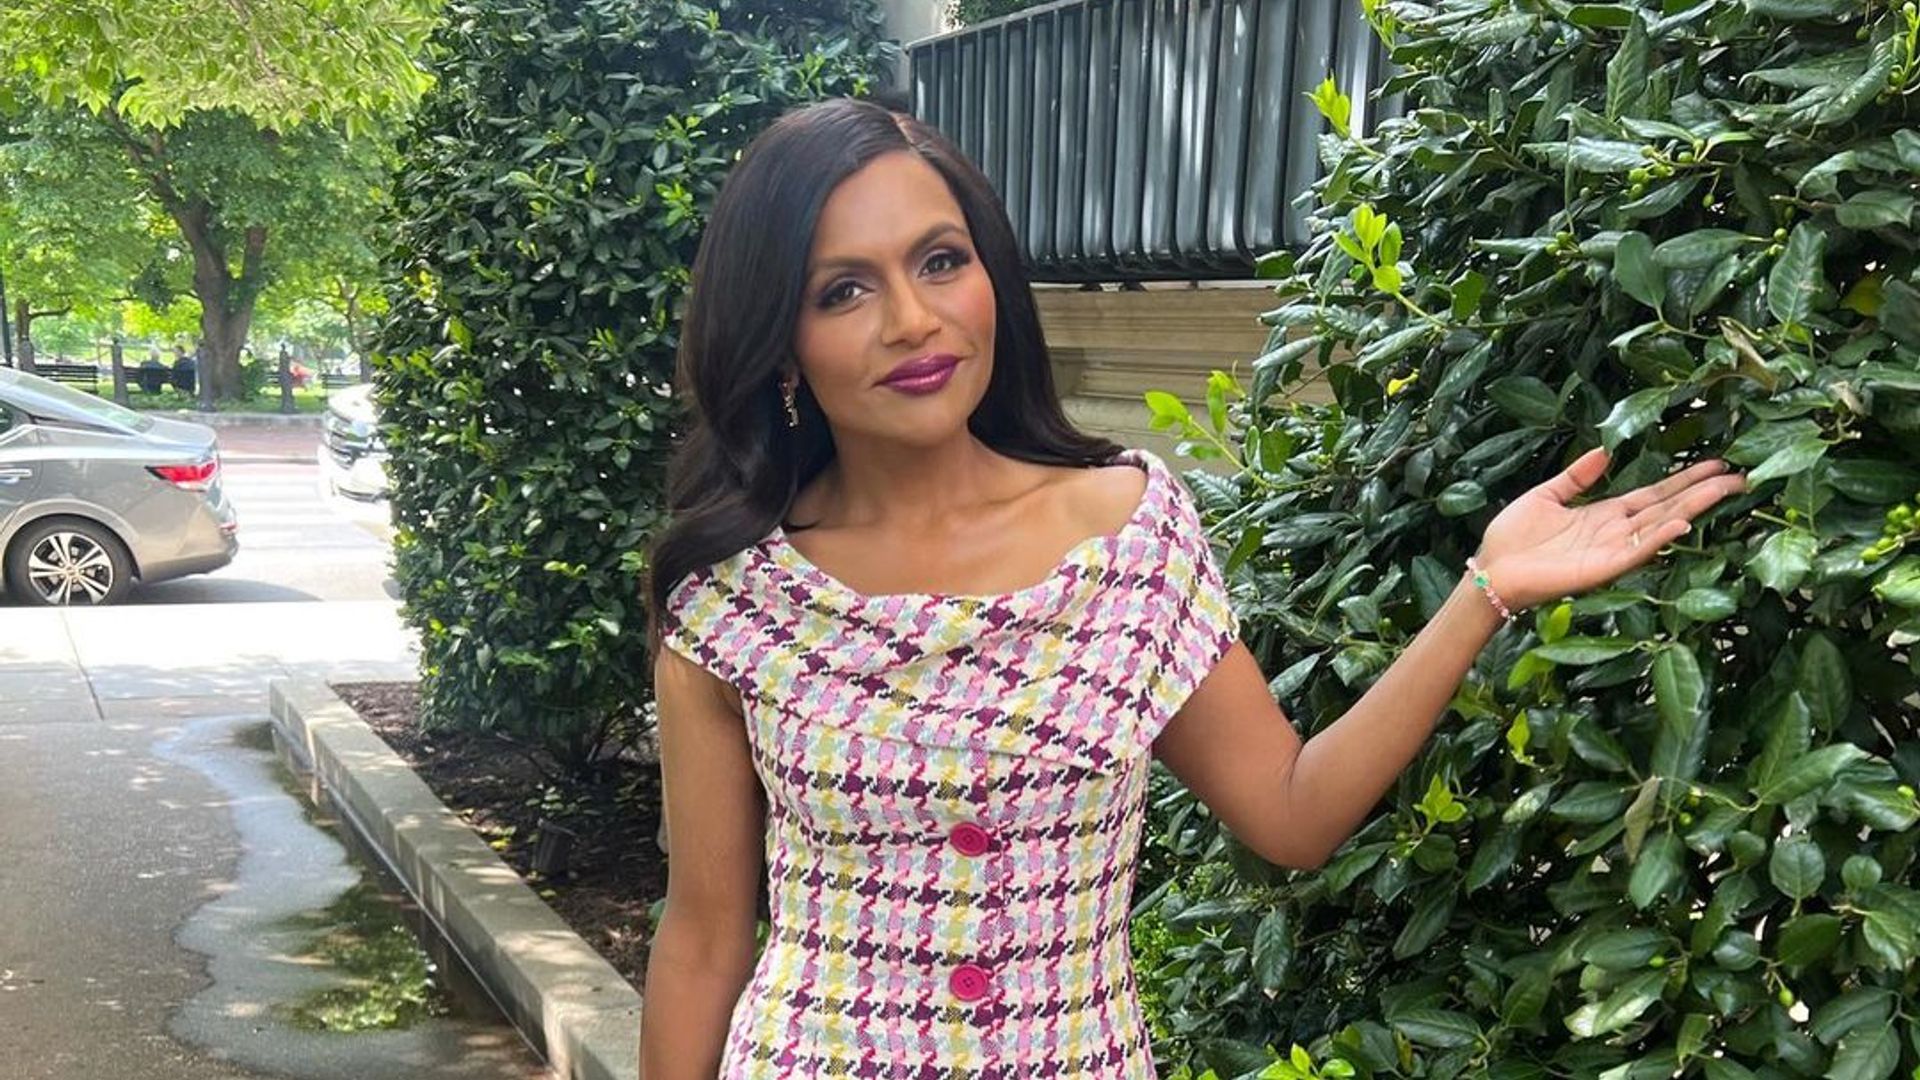 Mindy Kaling turns heads in tightfitting plaid dress after revealing incredible secrets to weightloss transformation